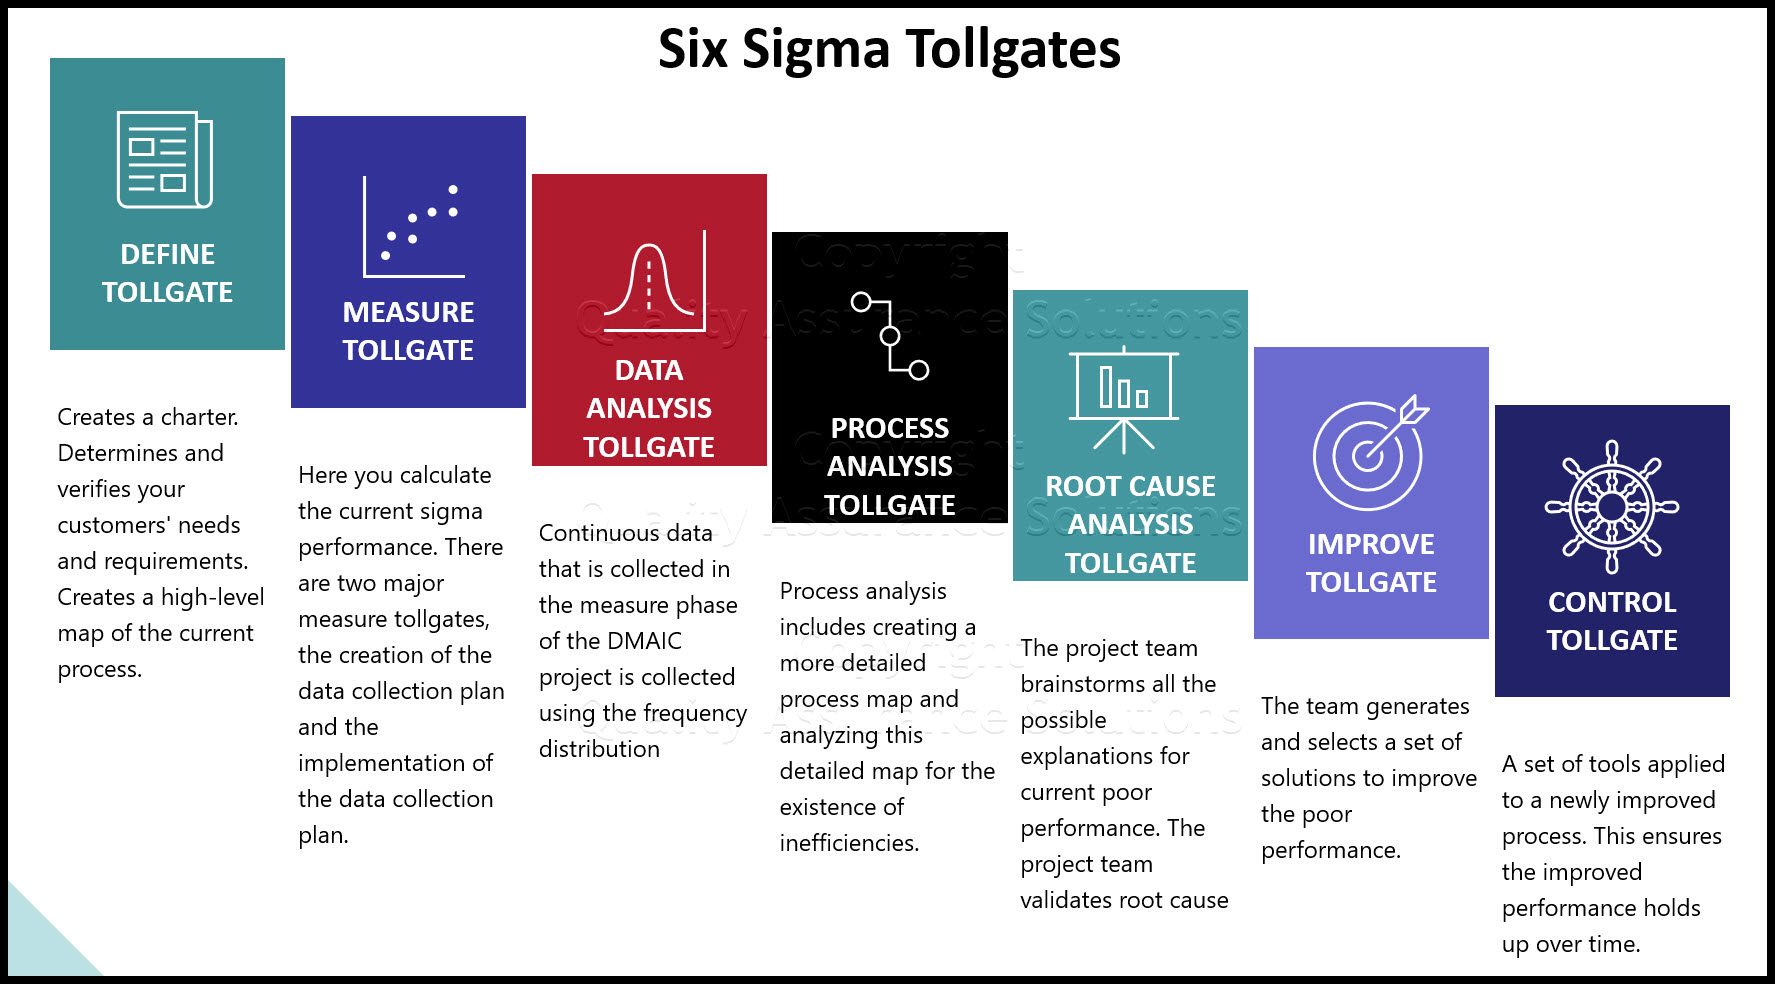 There are a total of seven tollgates within Six Sigma. Three of these are Analysis tollgates: Data Analysis, Process Analysis, and Root Cause Analysis. 